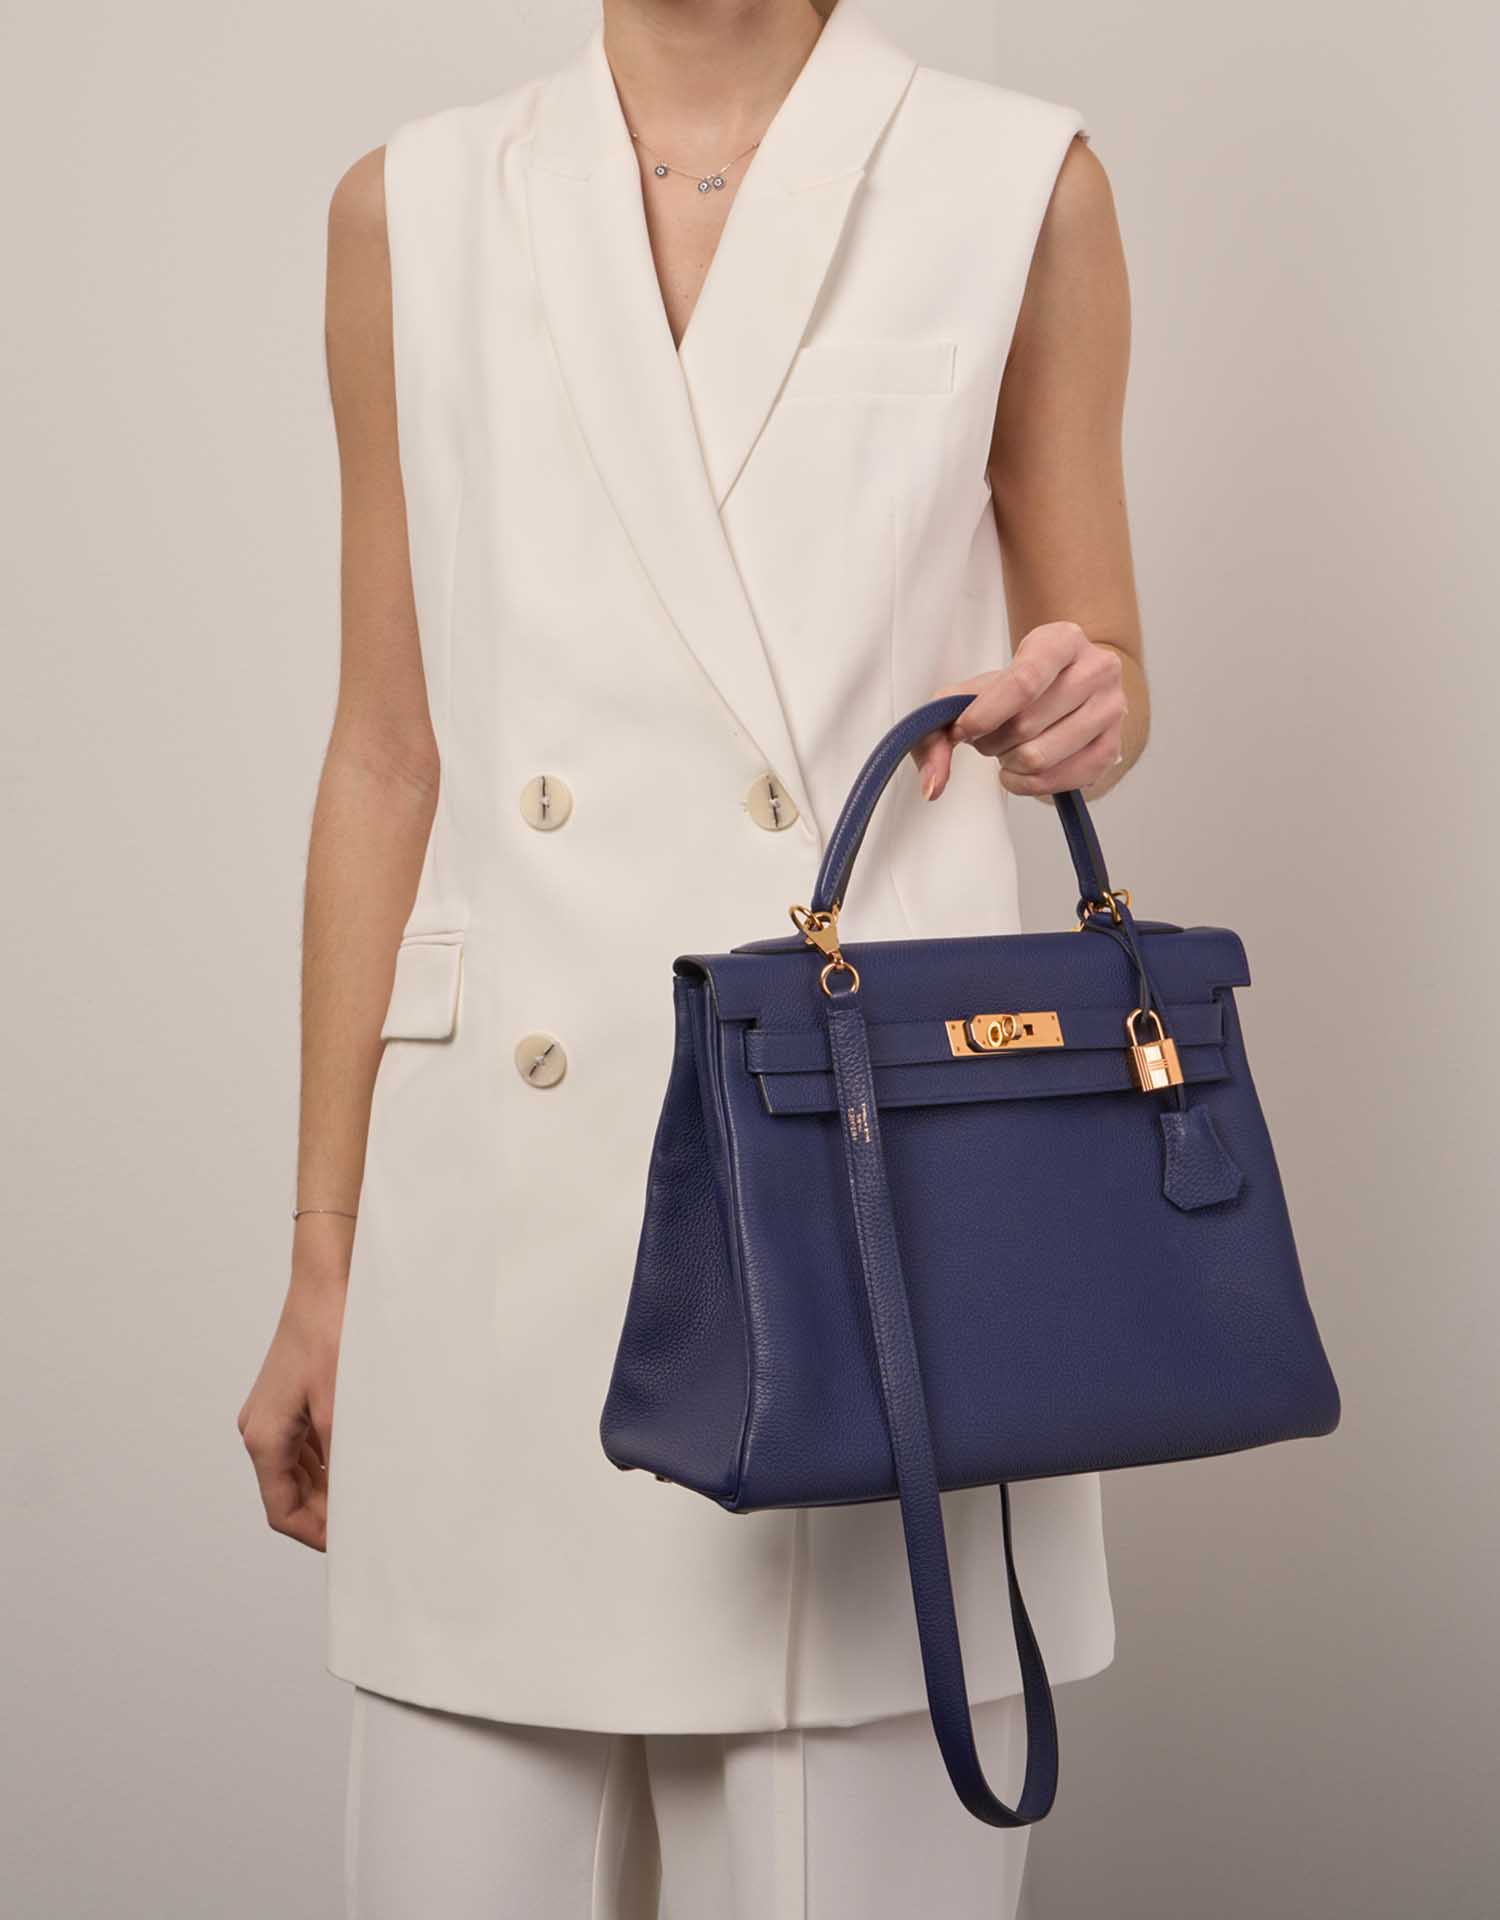 Hermes Kelly 32, What Fits! 